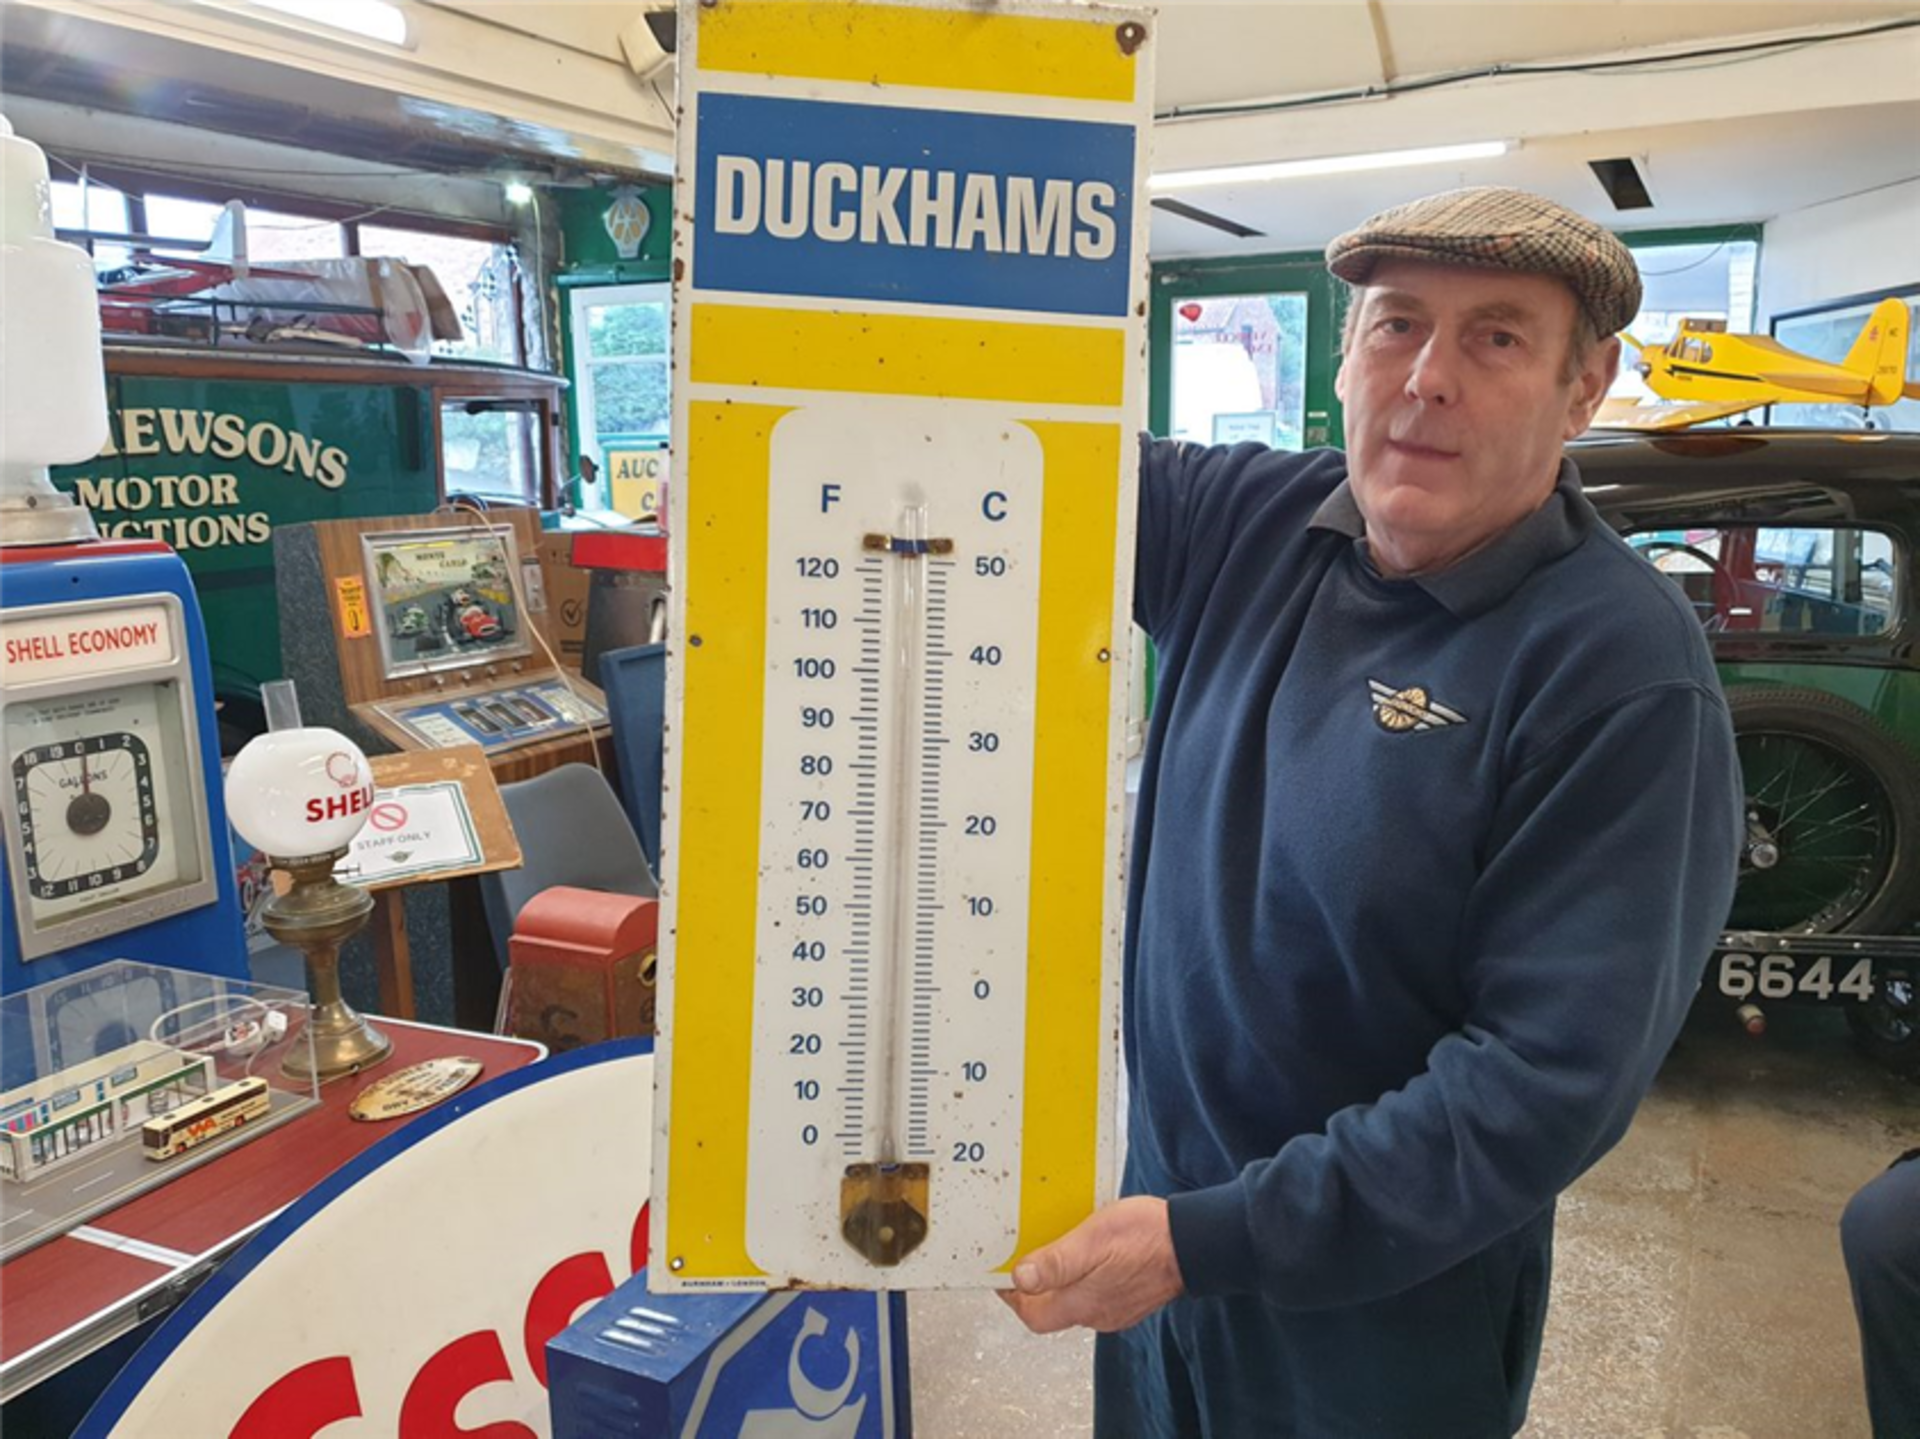 DUCKHAMS THERMOMETER SIGN